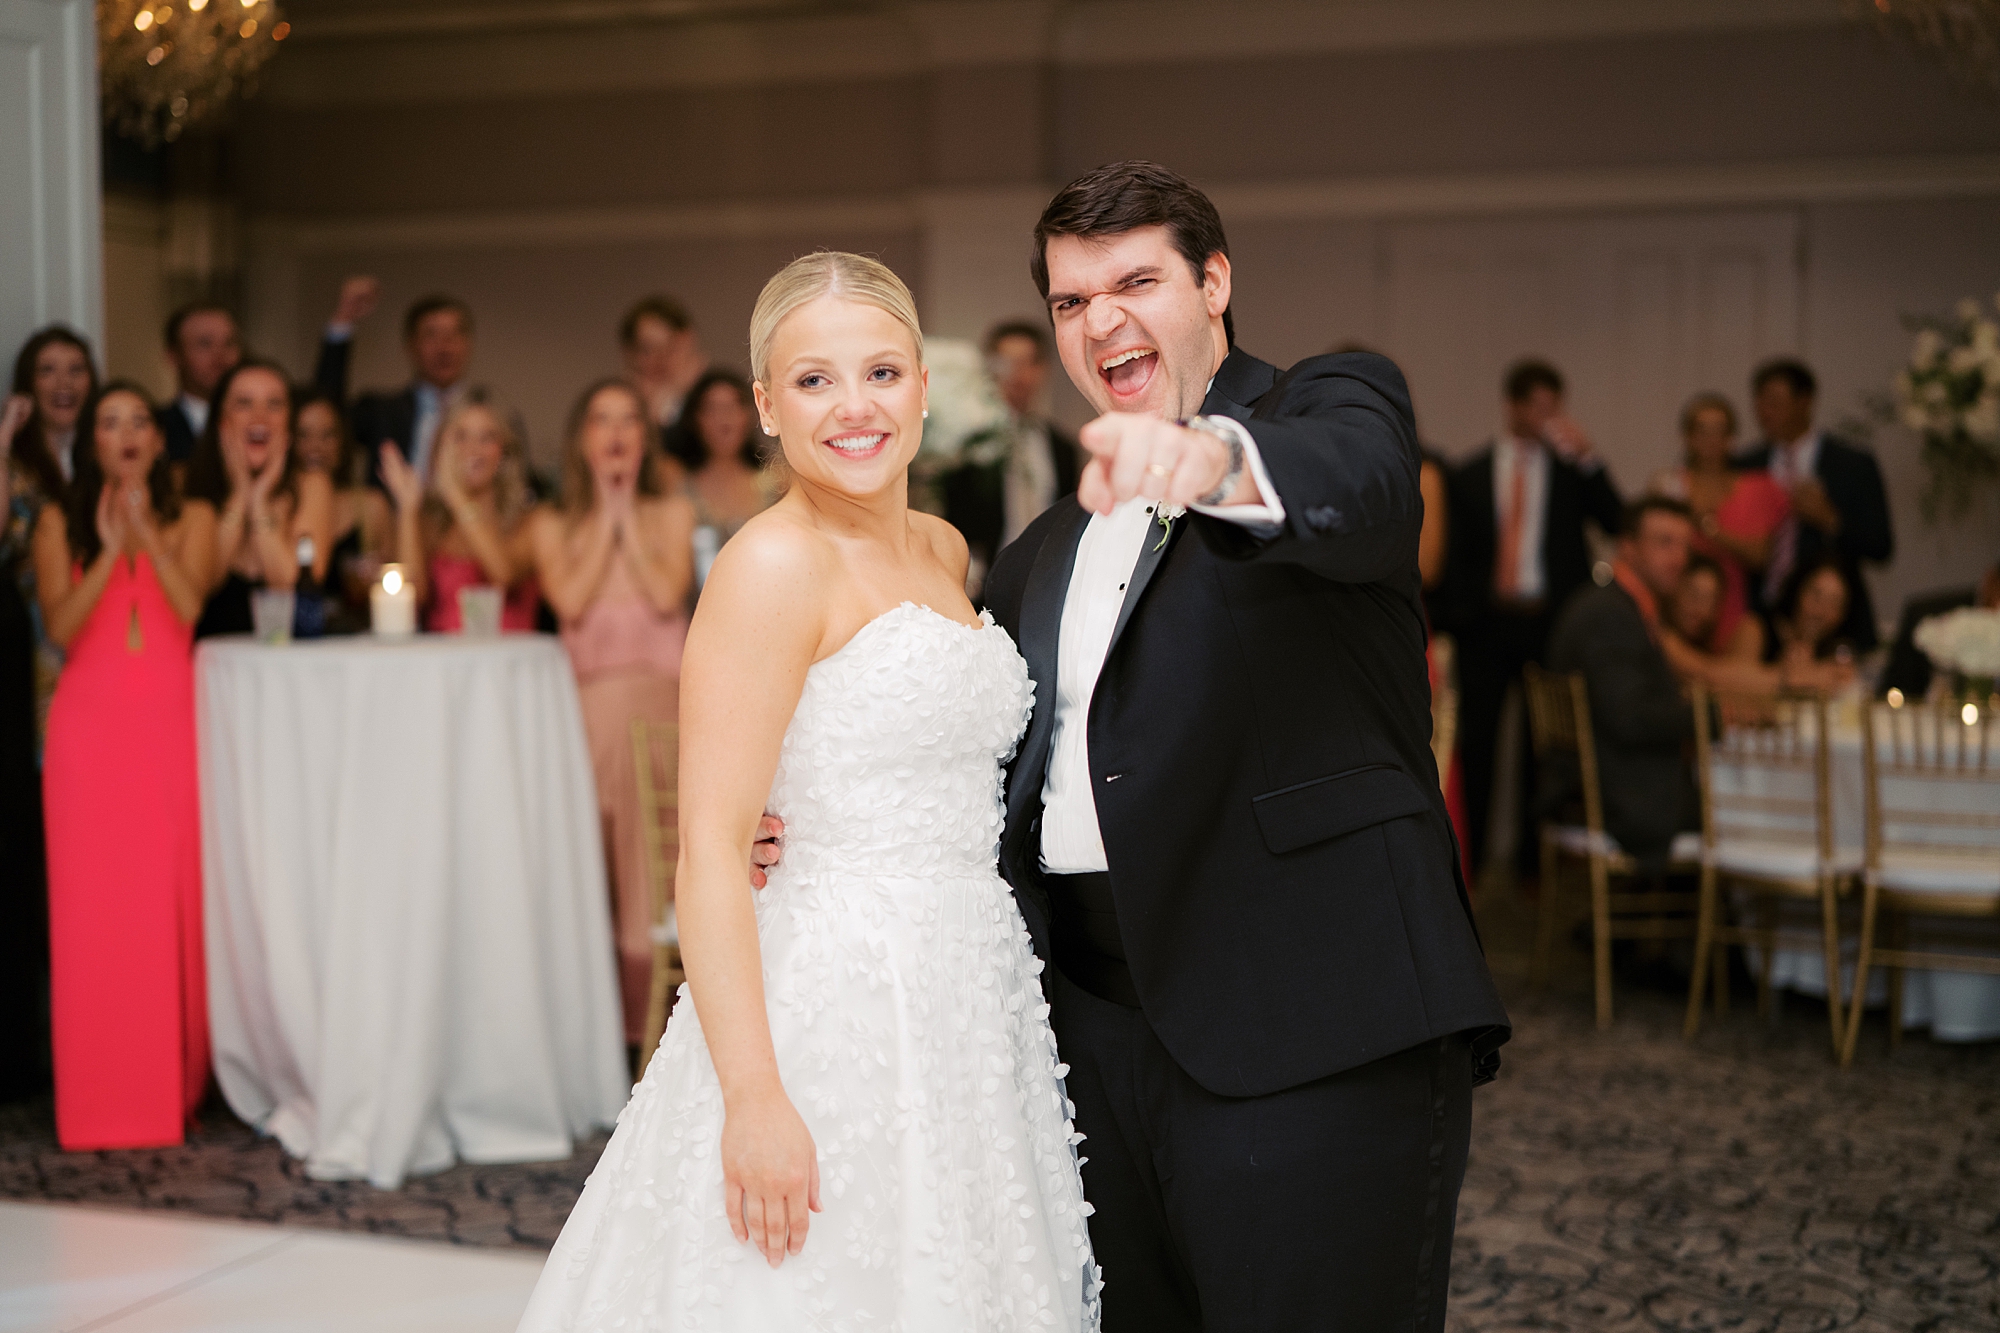 bride and groom pose on dance floor smiling for guests 